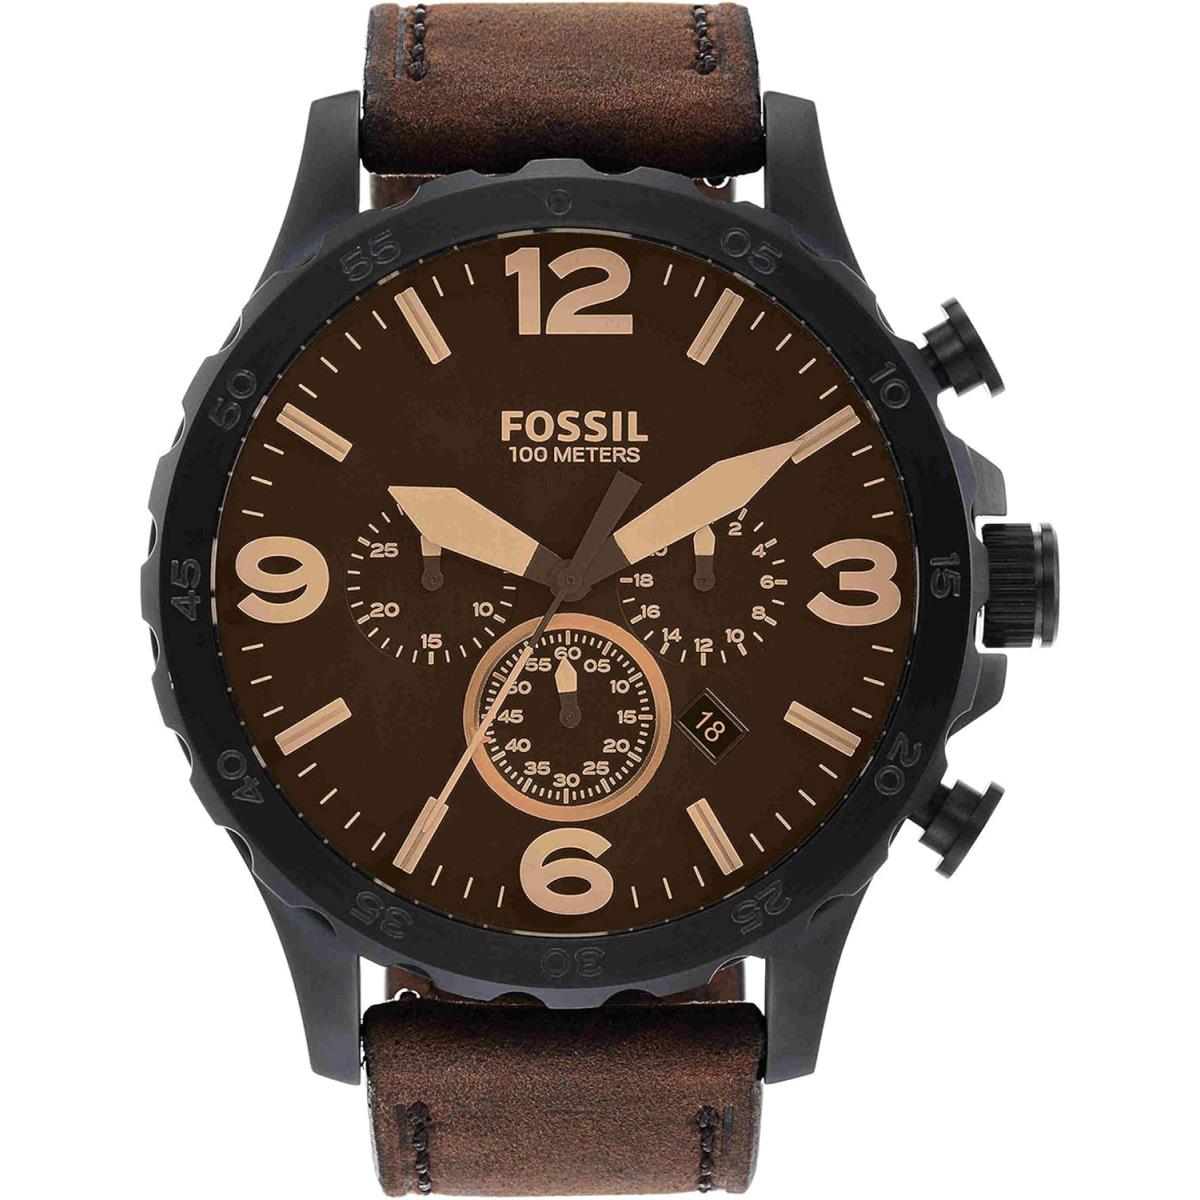 Fossil Nate Men`s Chronograph Watch with Stainless Steel or Leather Band Black/Brown Leather